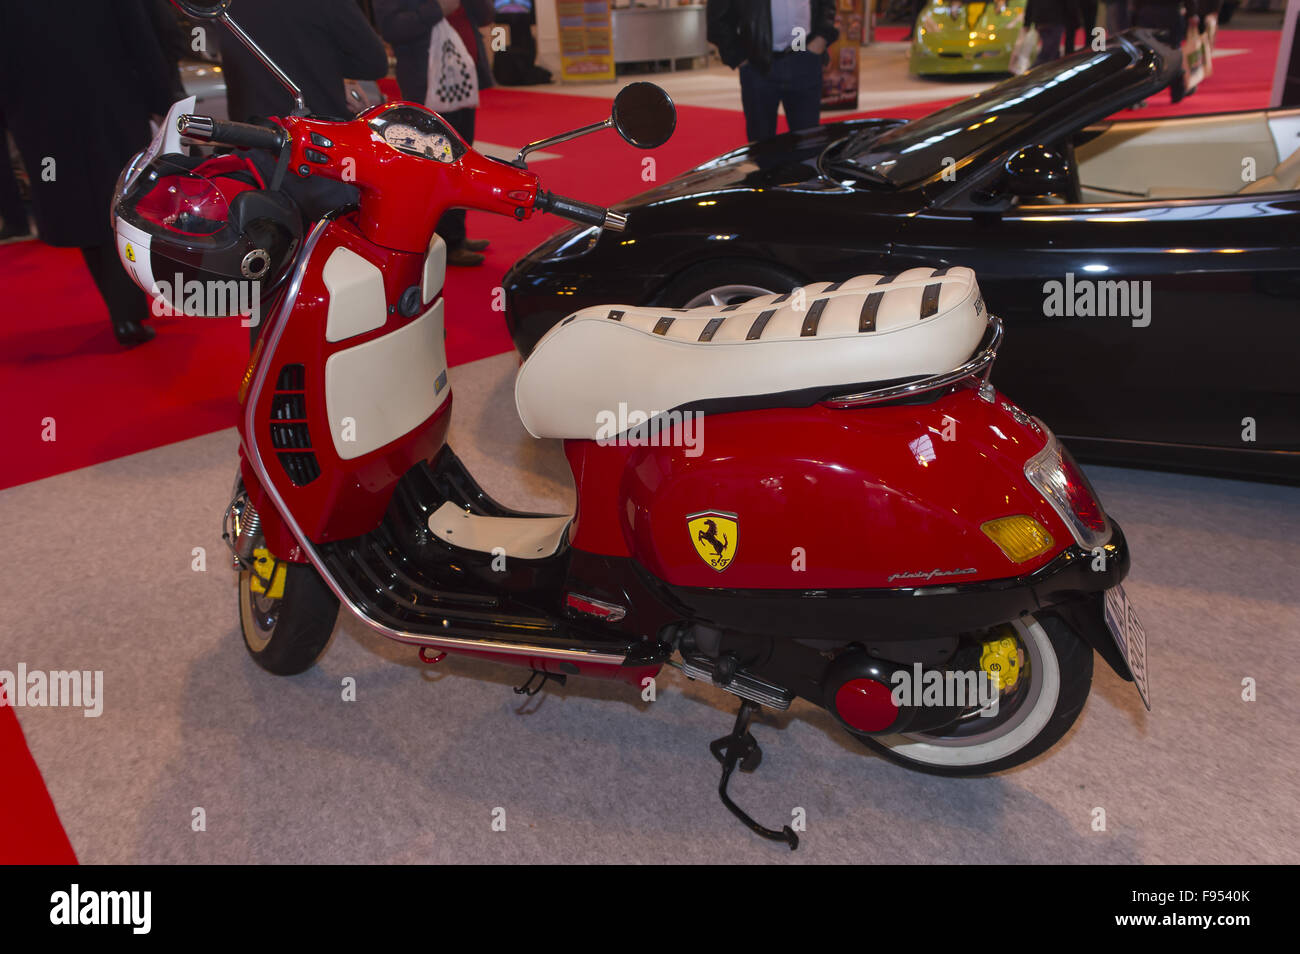 Classic Motor Show 2015 at The NEC Birmingham. A Ferrari Scooter for under  £6,000 with 3,000 miles on the clock. A Blackpool based tailor made  vehicles company called Void Auto have made